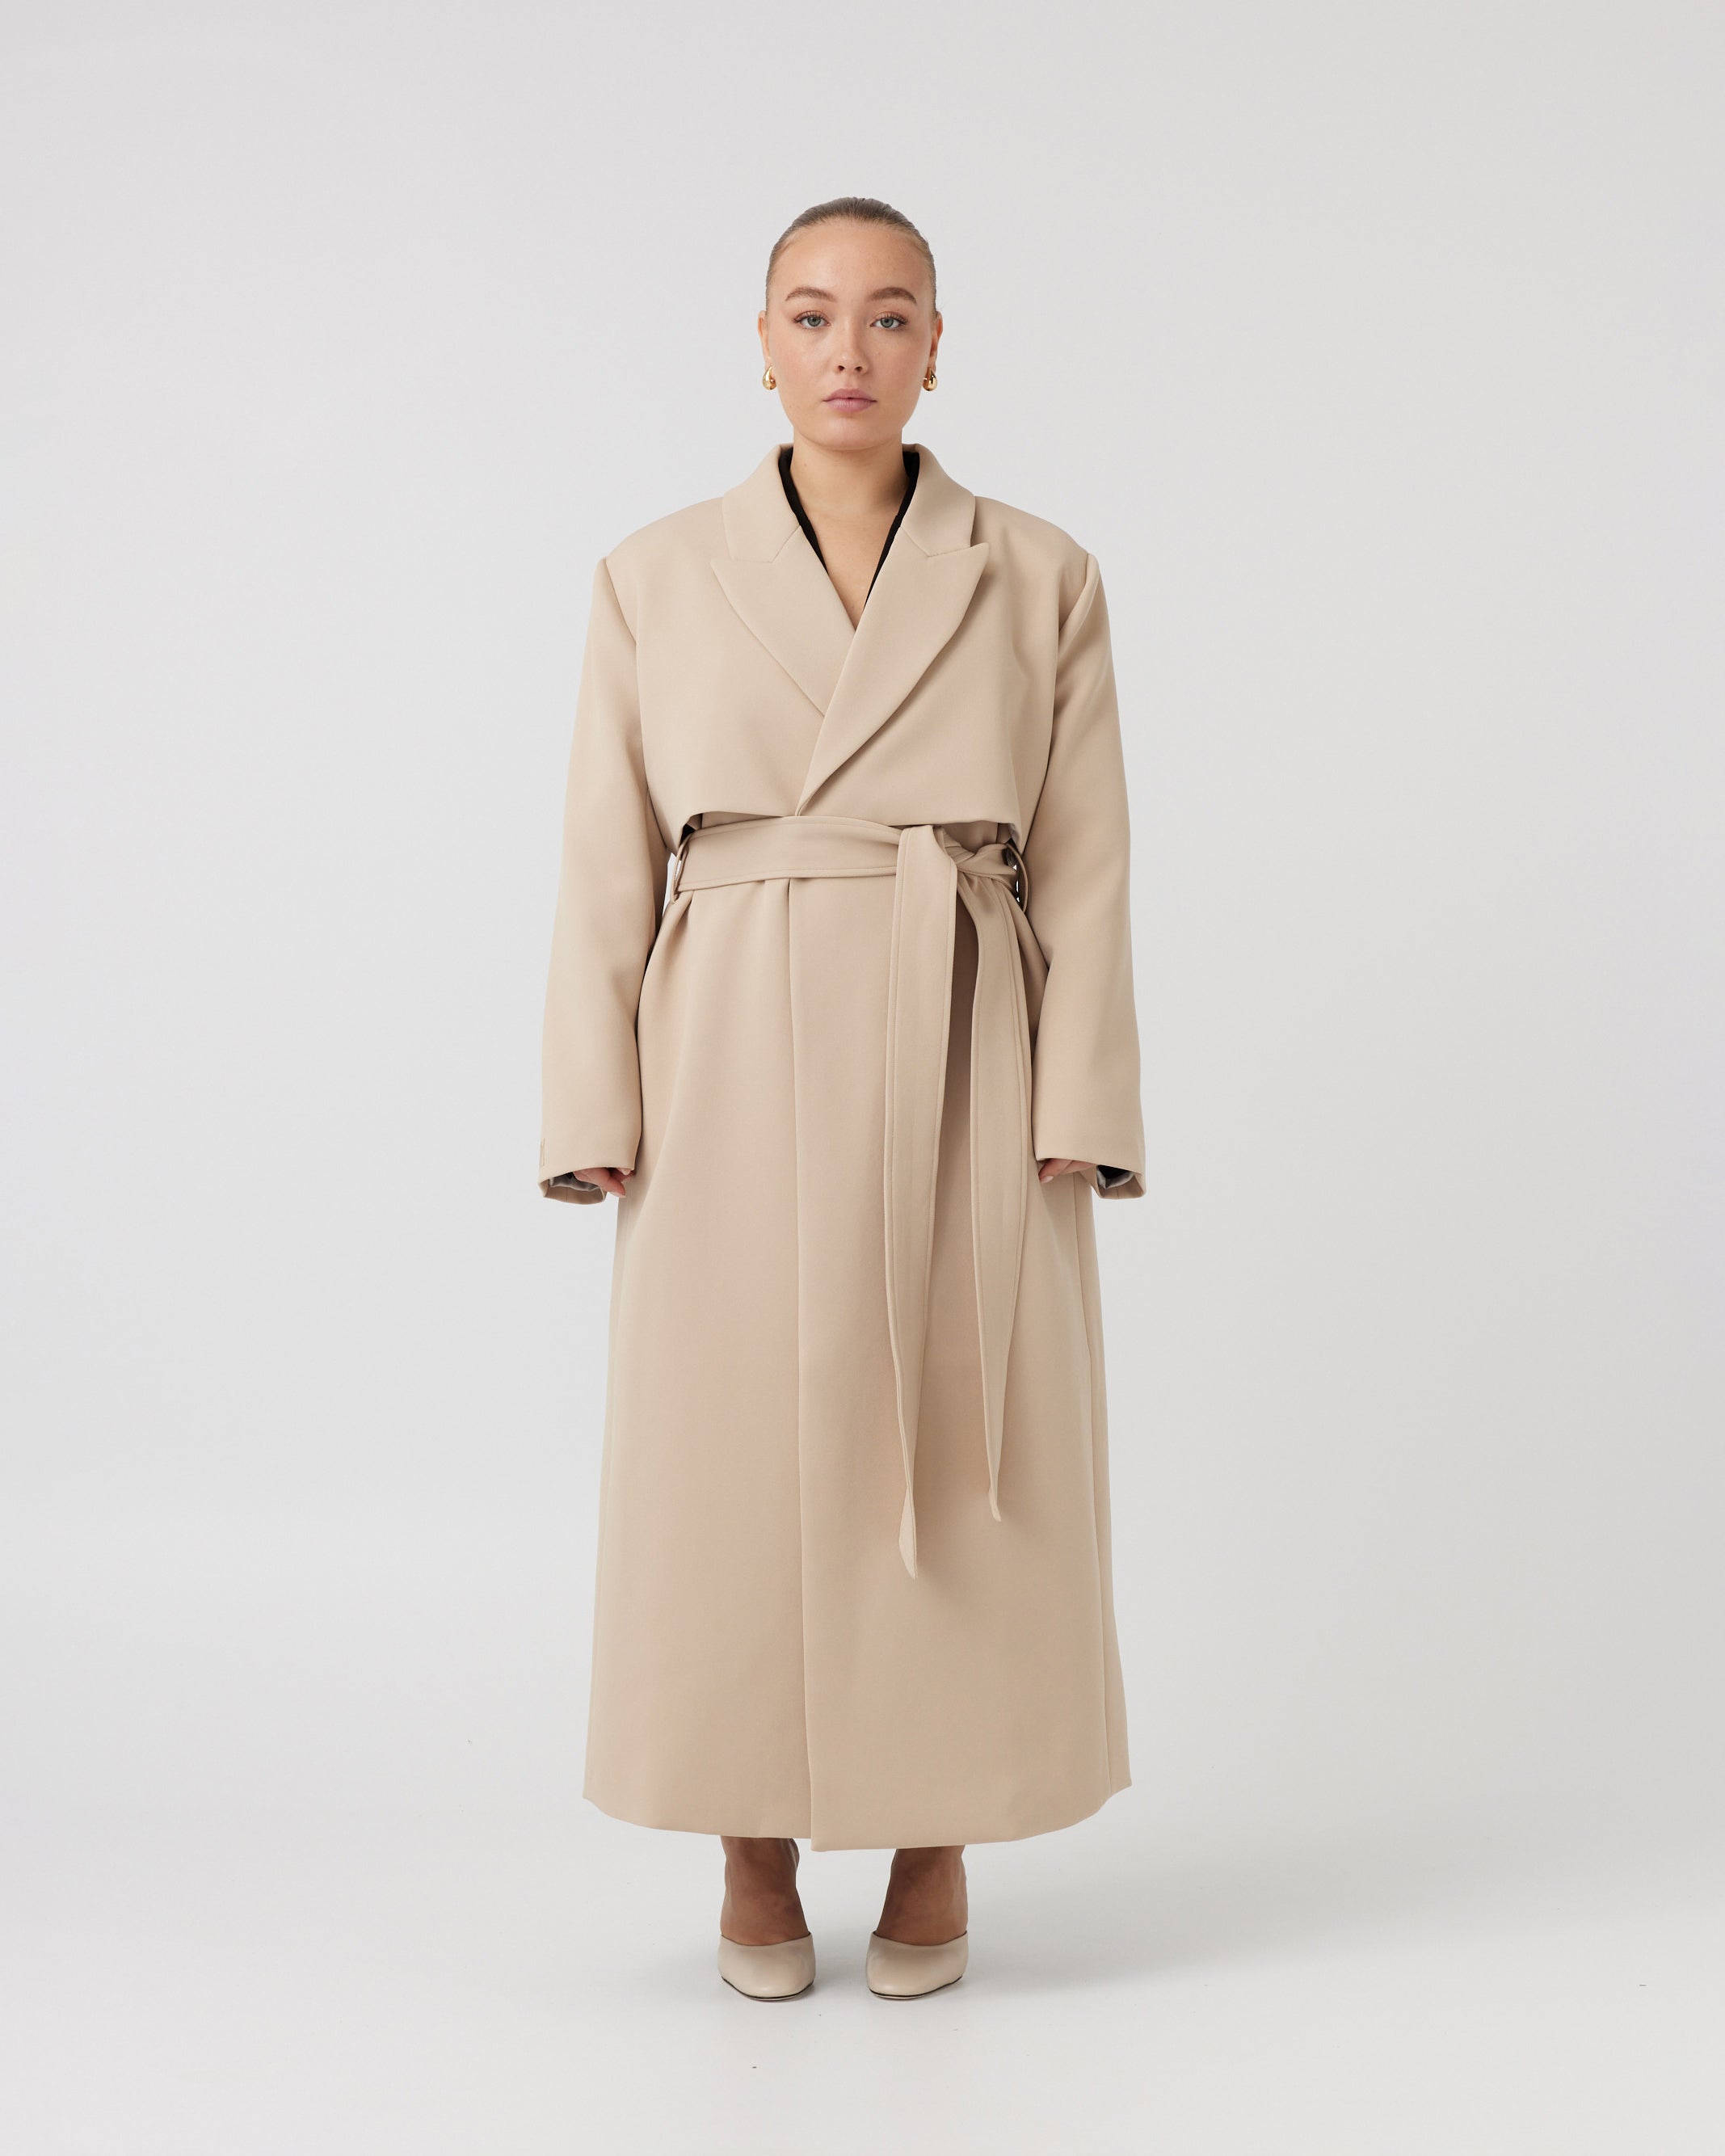 Wide angle image of a curvaceous woman with dark blonde hair wearing a minimalistic trench coat in taupe tied up around her waist with a matching taupe waist tie. Trench coat flows over her body and cuts just above the ankle.